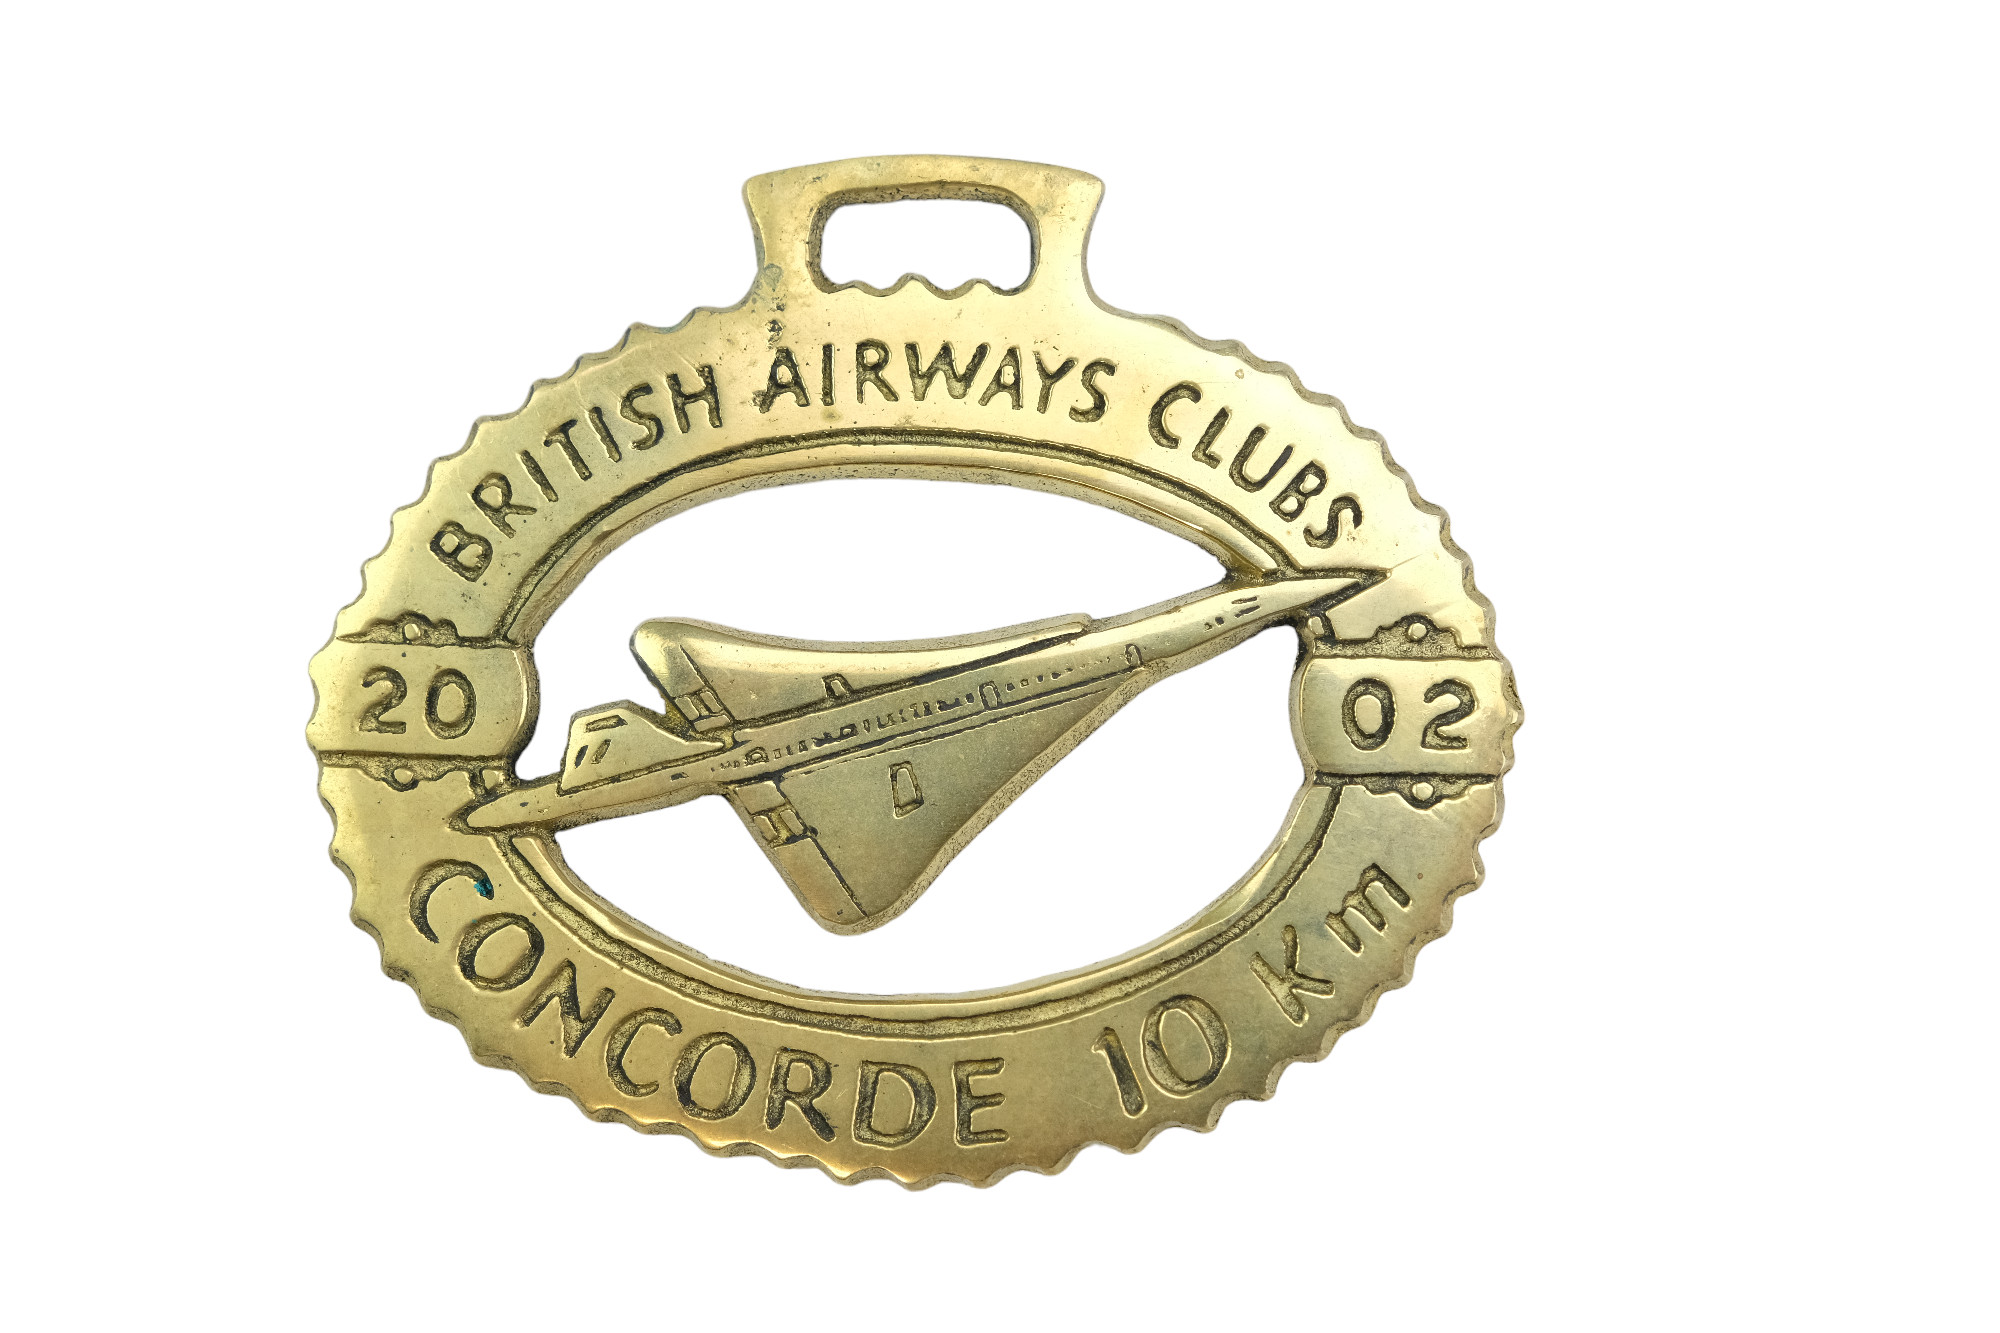 A group of British Airways Concorde collectables including two candlesticks, key rings, playing - Image 3 of 8